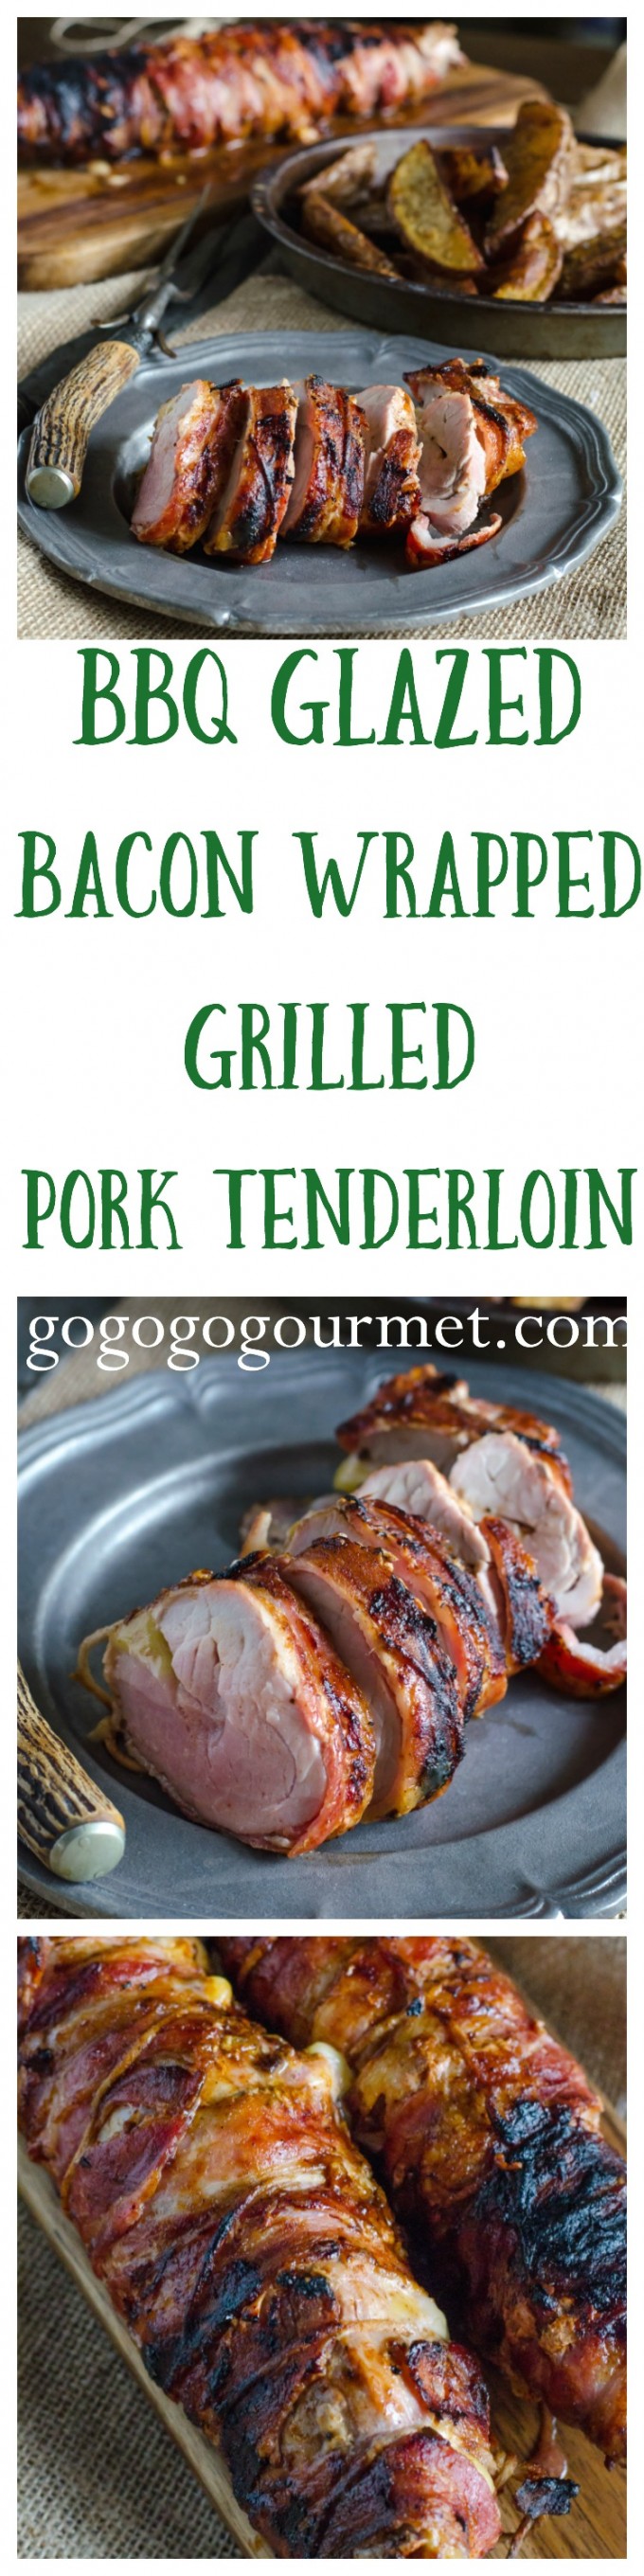 Glazed with BBQ Sauce, wrapped in bacon, stuffed with cheese, and easy to boot? This is sure to become your new favorite summer weeknight dinner! BBQ Glazed Bacon Wrapped Grilled Pork Tenderloin | Go Go Go Gourmet @Go Go Go Gourmet via @gogogogourmet